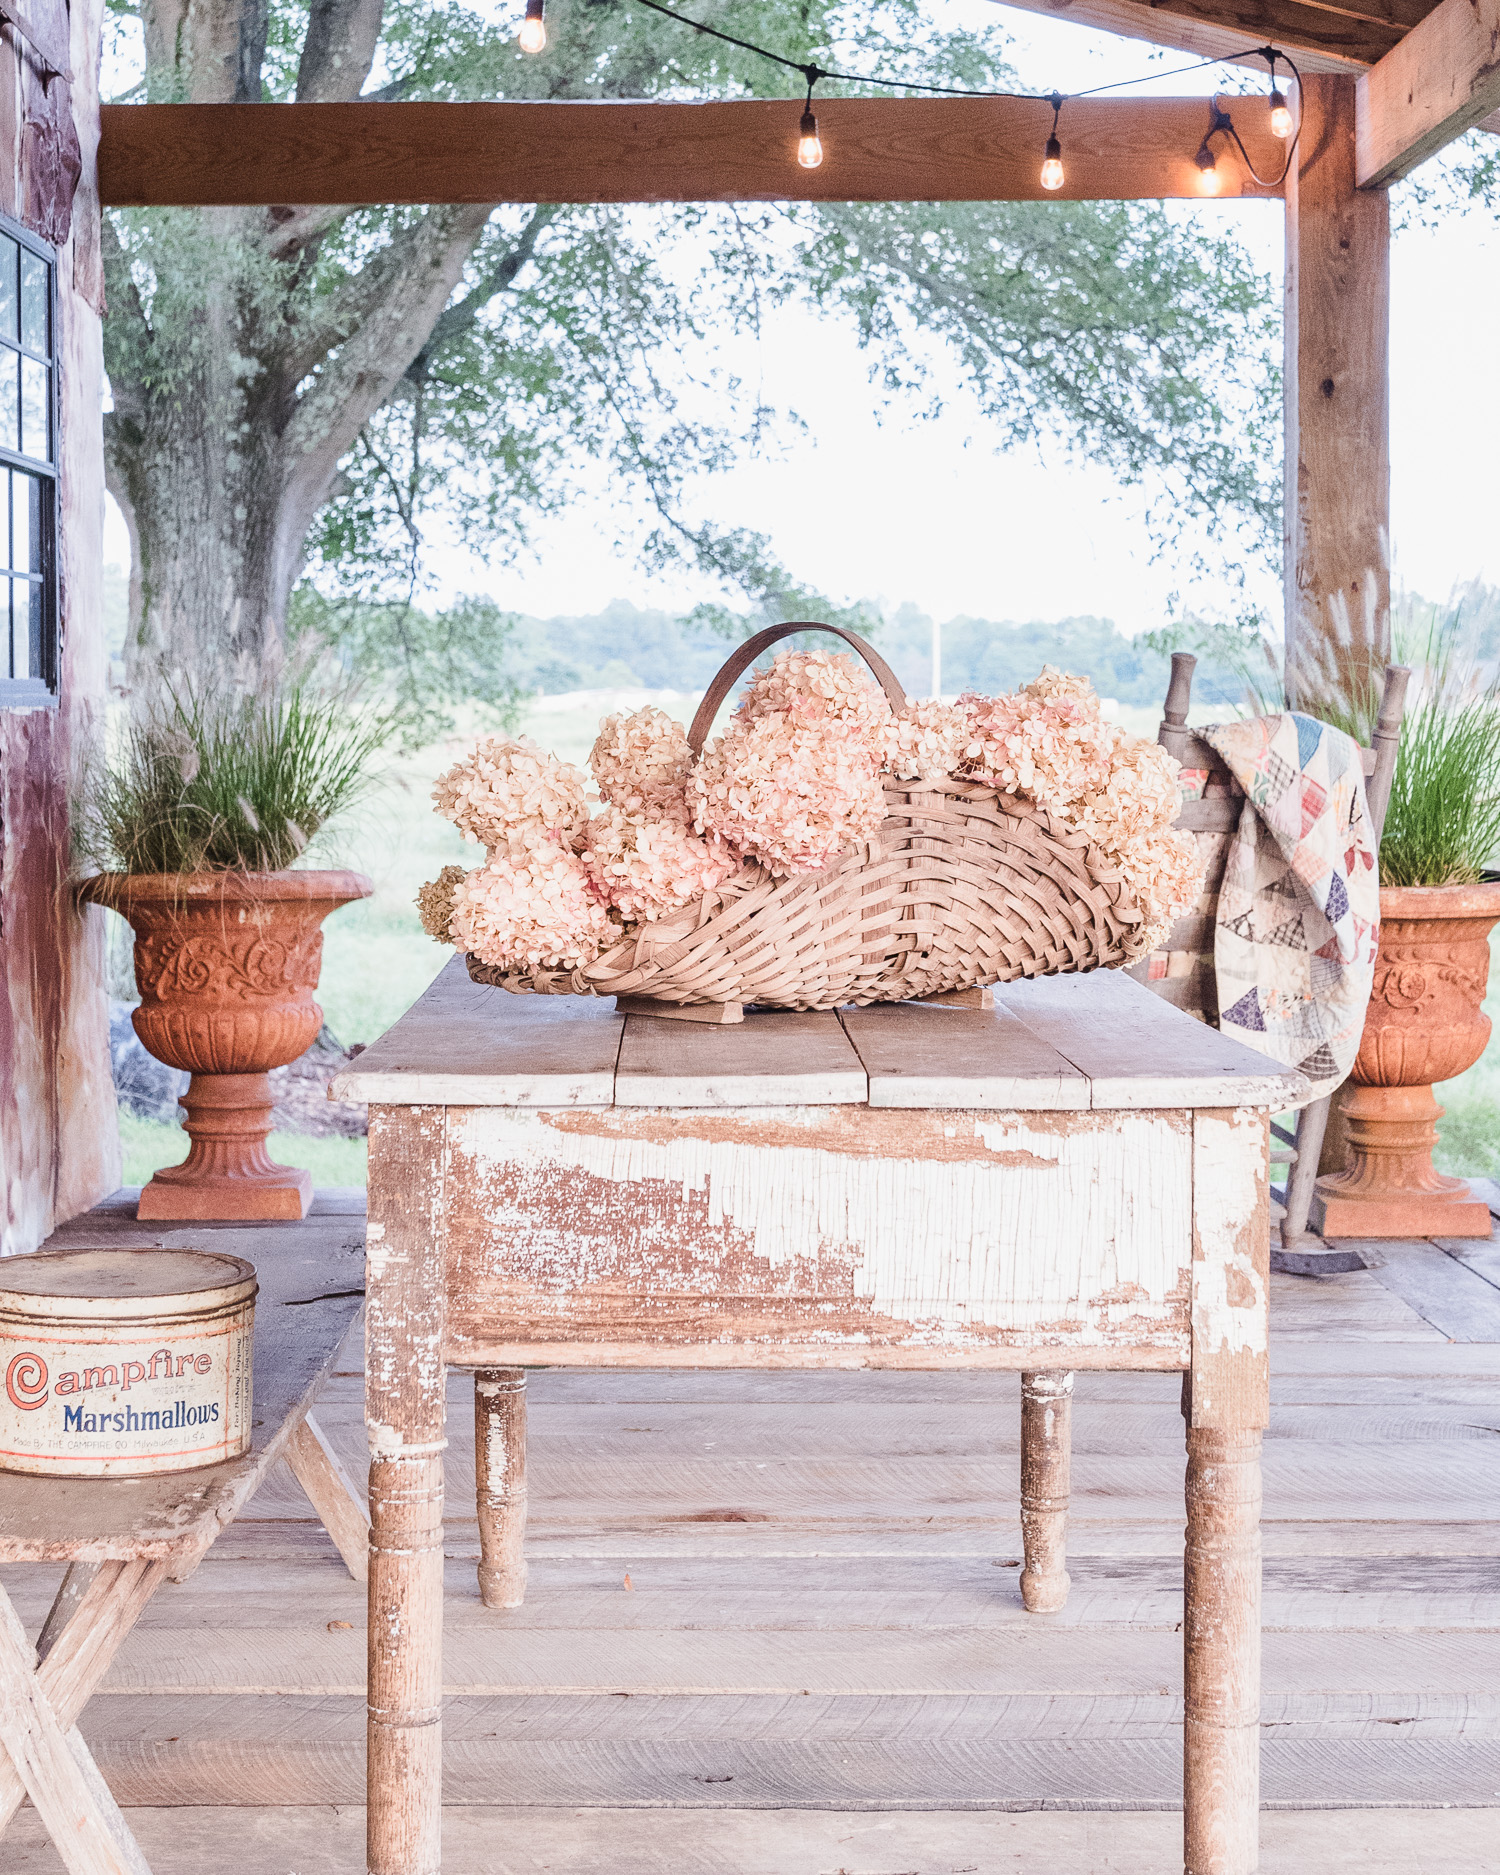 Simple Summer Styling on our barn porch. Dried hydrangeas, vintage baskets, tins, and an antique cutter quilt